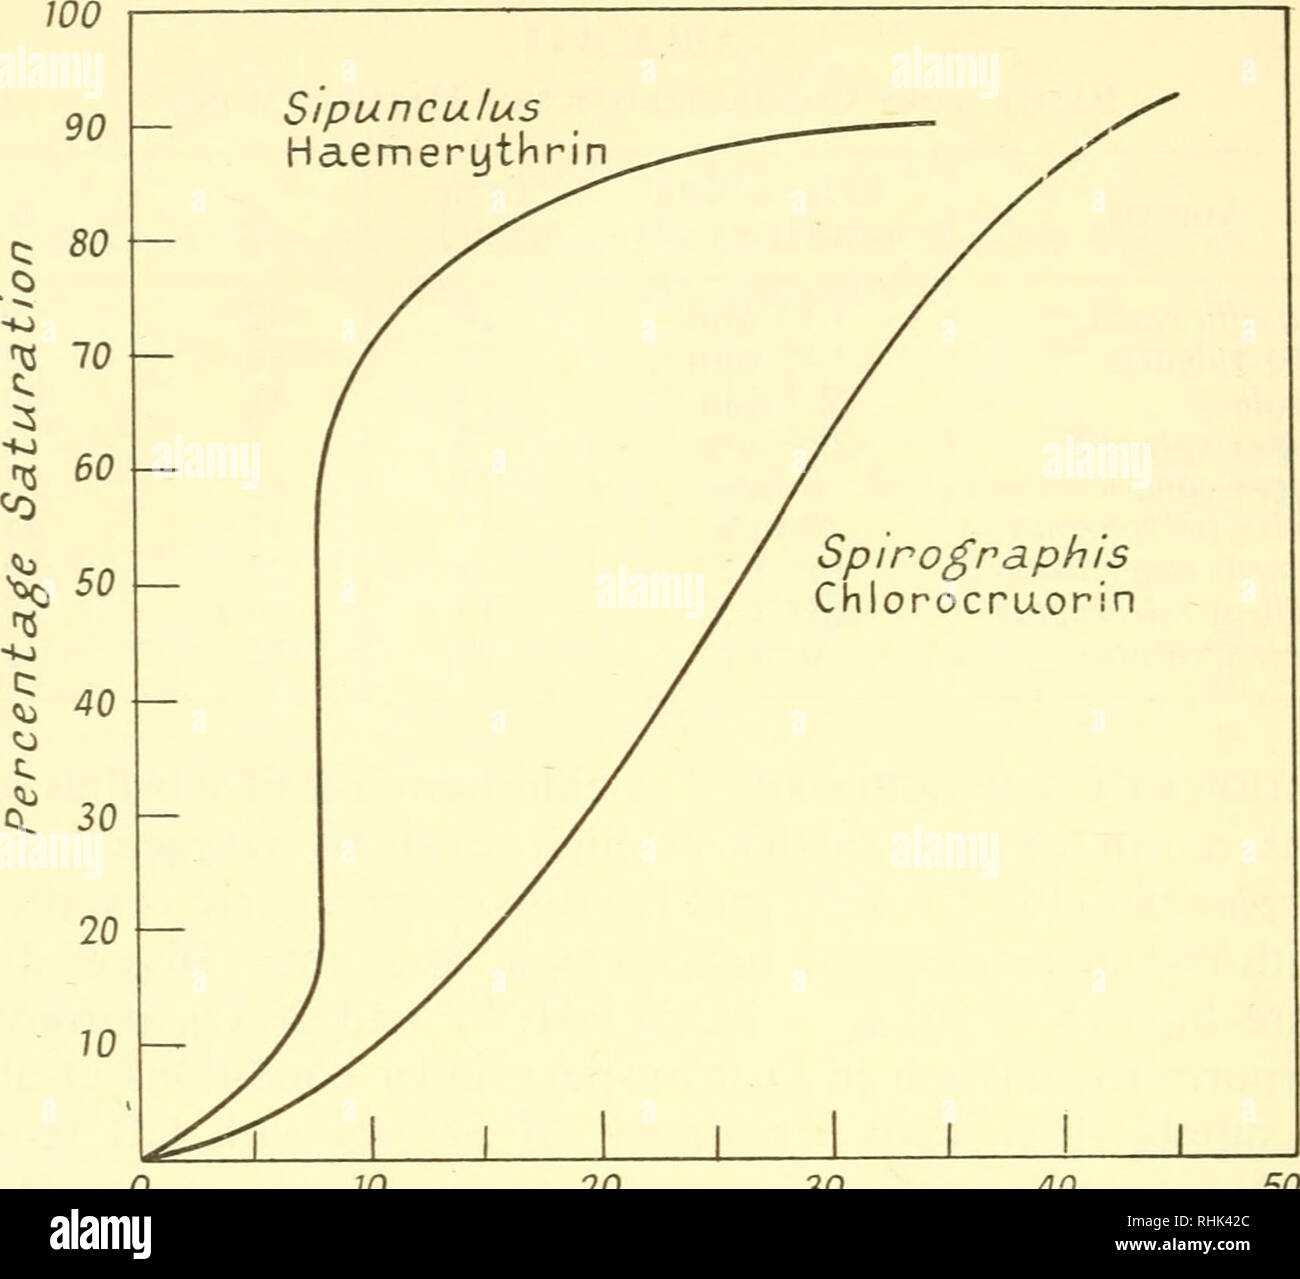 . The biology of marine animals. Marine animals; Physiology, Comparative. 0 10 20 30 40 Oxygen Tension (mm Hg) Fig. 4.20. Oxygen Dissociation Curves for Haemerythrin of Sipunculus nudus (19&amp;C, C02 0-07-80 mm Hg), and Chlorocruorin of Spirographs spallanzanii (20°C, pH 7-7) (Haemerythrin data from Florkin, 1932; chlorocruorin data from H. M. Fox, 1932.) Fig. 60 - 5 .§ 40 5 - o ^^^^ O// o &quot;&quot;&quot;&quot;A A 1 £ &amp;s* ' A jo I-VJ 1 1 I i ISO / 2 3 4-56 Oxygen Concentration 4.21. Effect of carbon monoxide on Oxygen Consumption of Sabella pavonina, a Worm Containing Chlorocruorin The Stock Photo